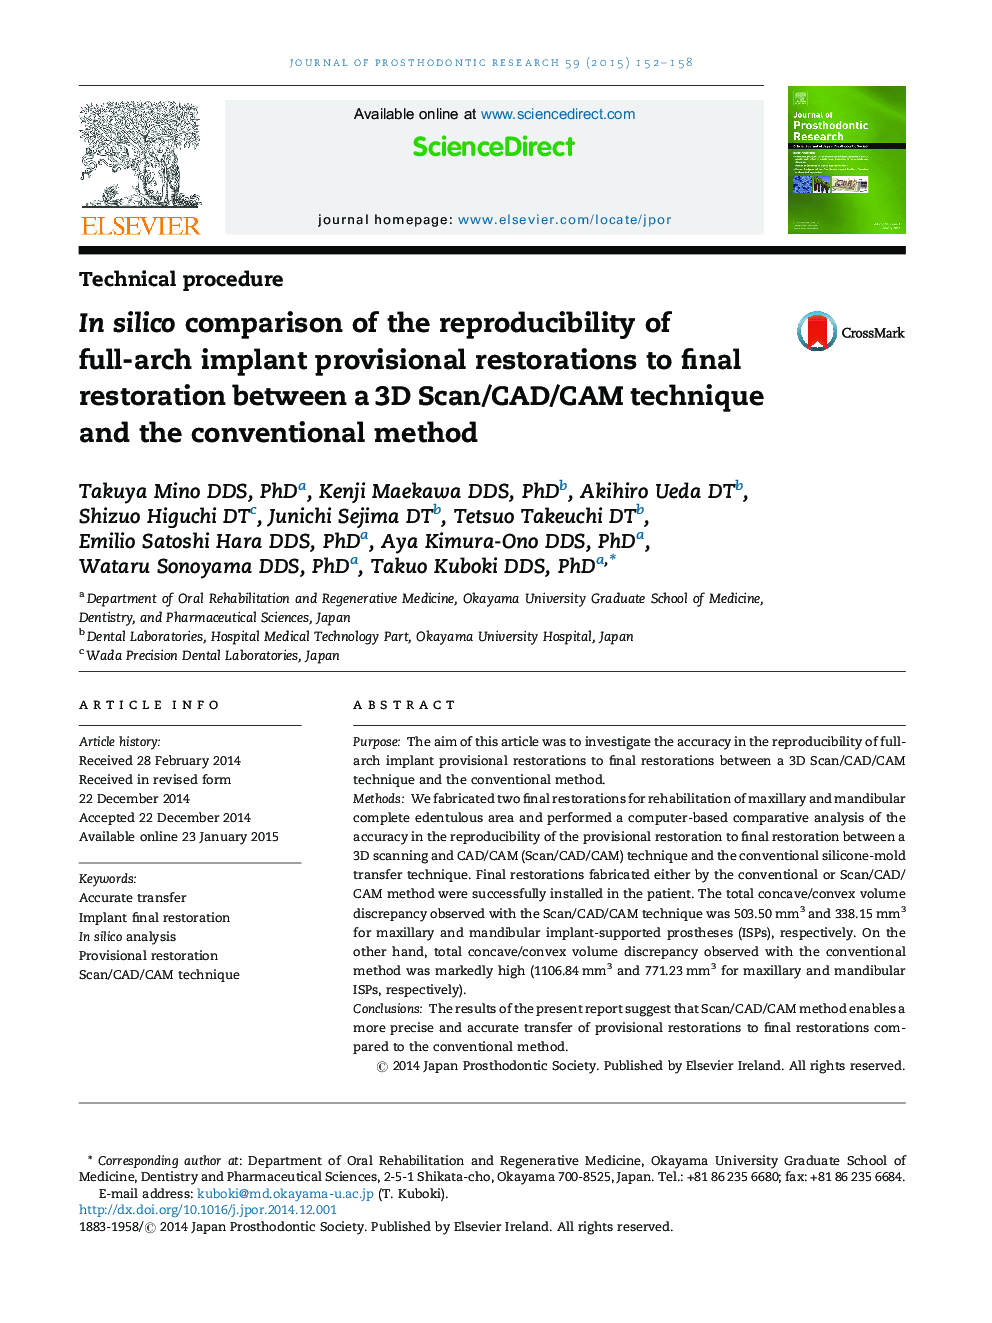 In silico comparison of the reproducibility of full-arch implant provisional restorations to final restoration between a 3D Scan/CAD/CAM technique and the conventional method